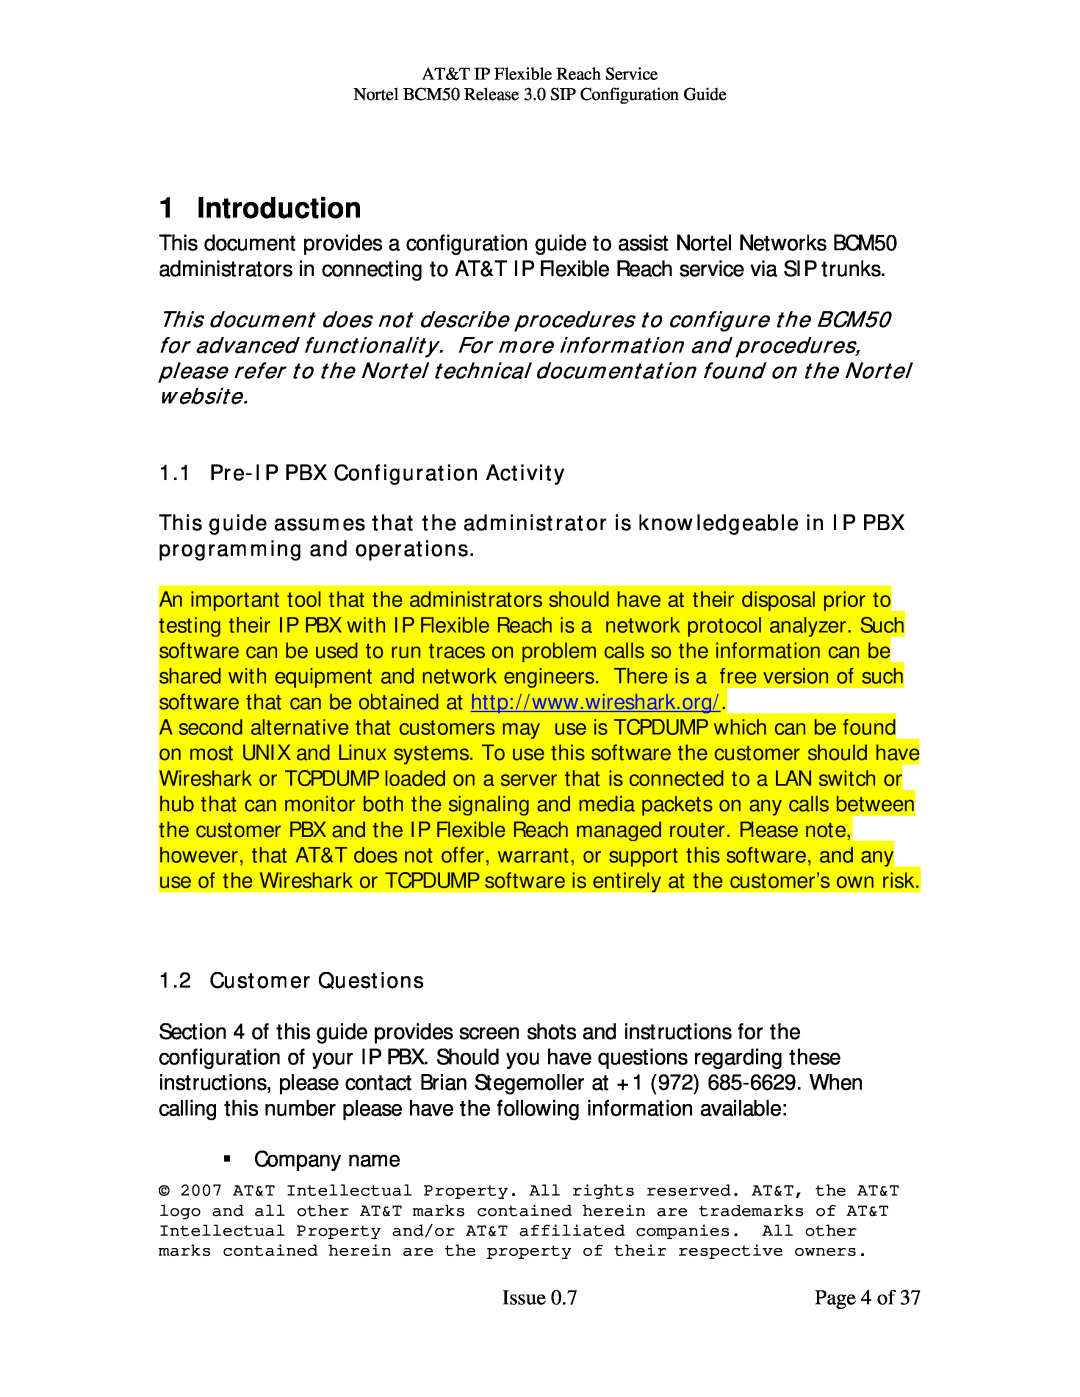 AT&T BCM50 manual Introduction, Pre-IP PBX Configuration Activity, Customer Questions 